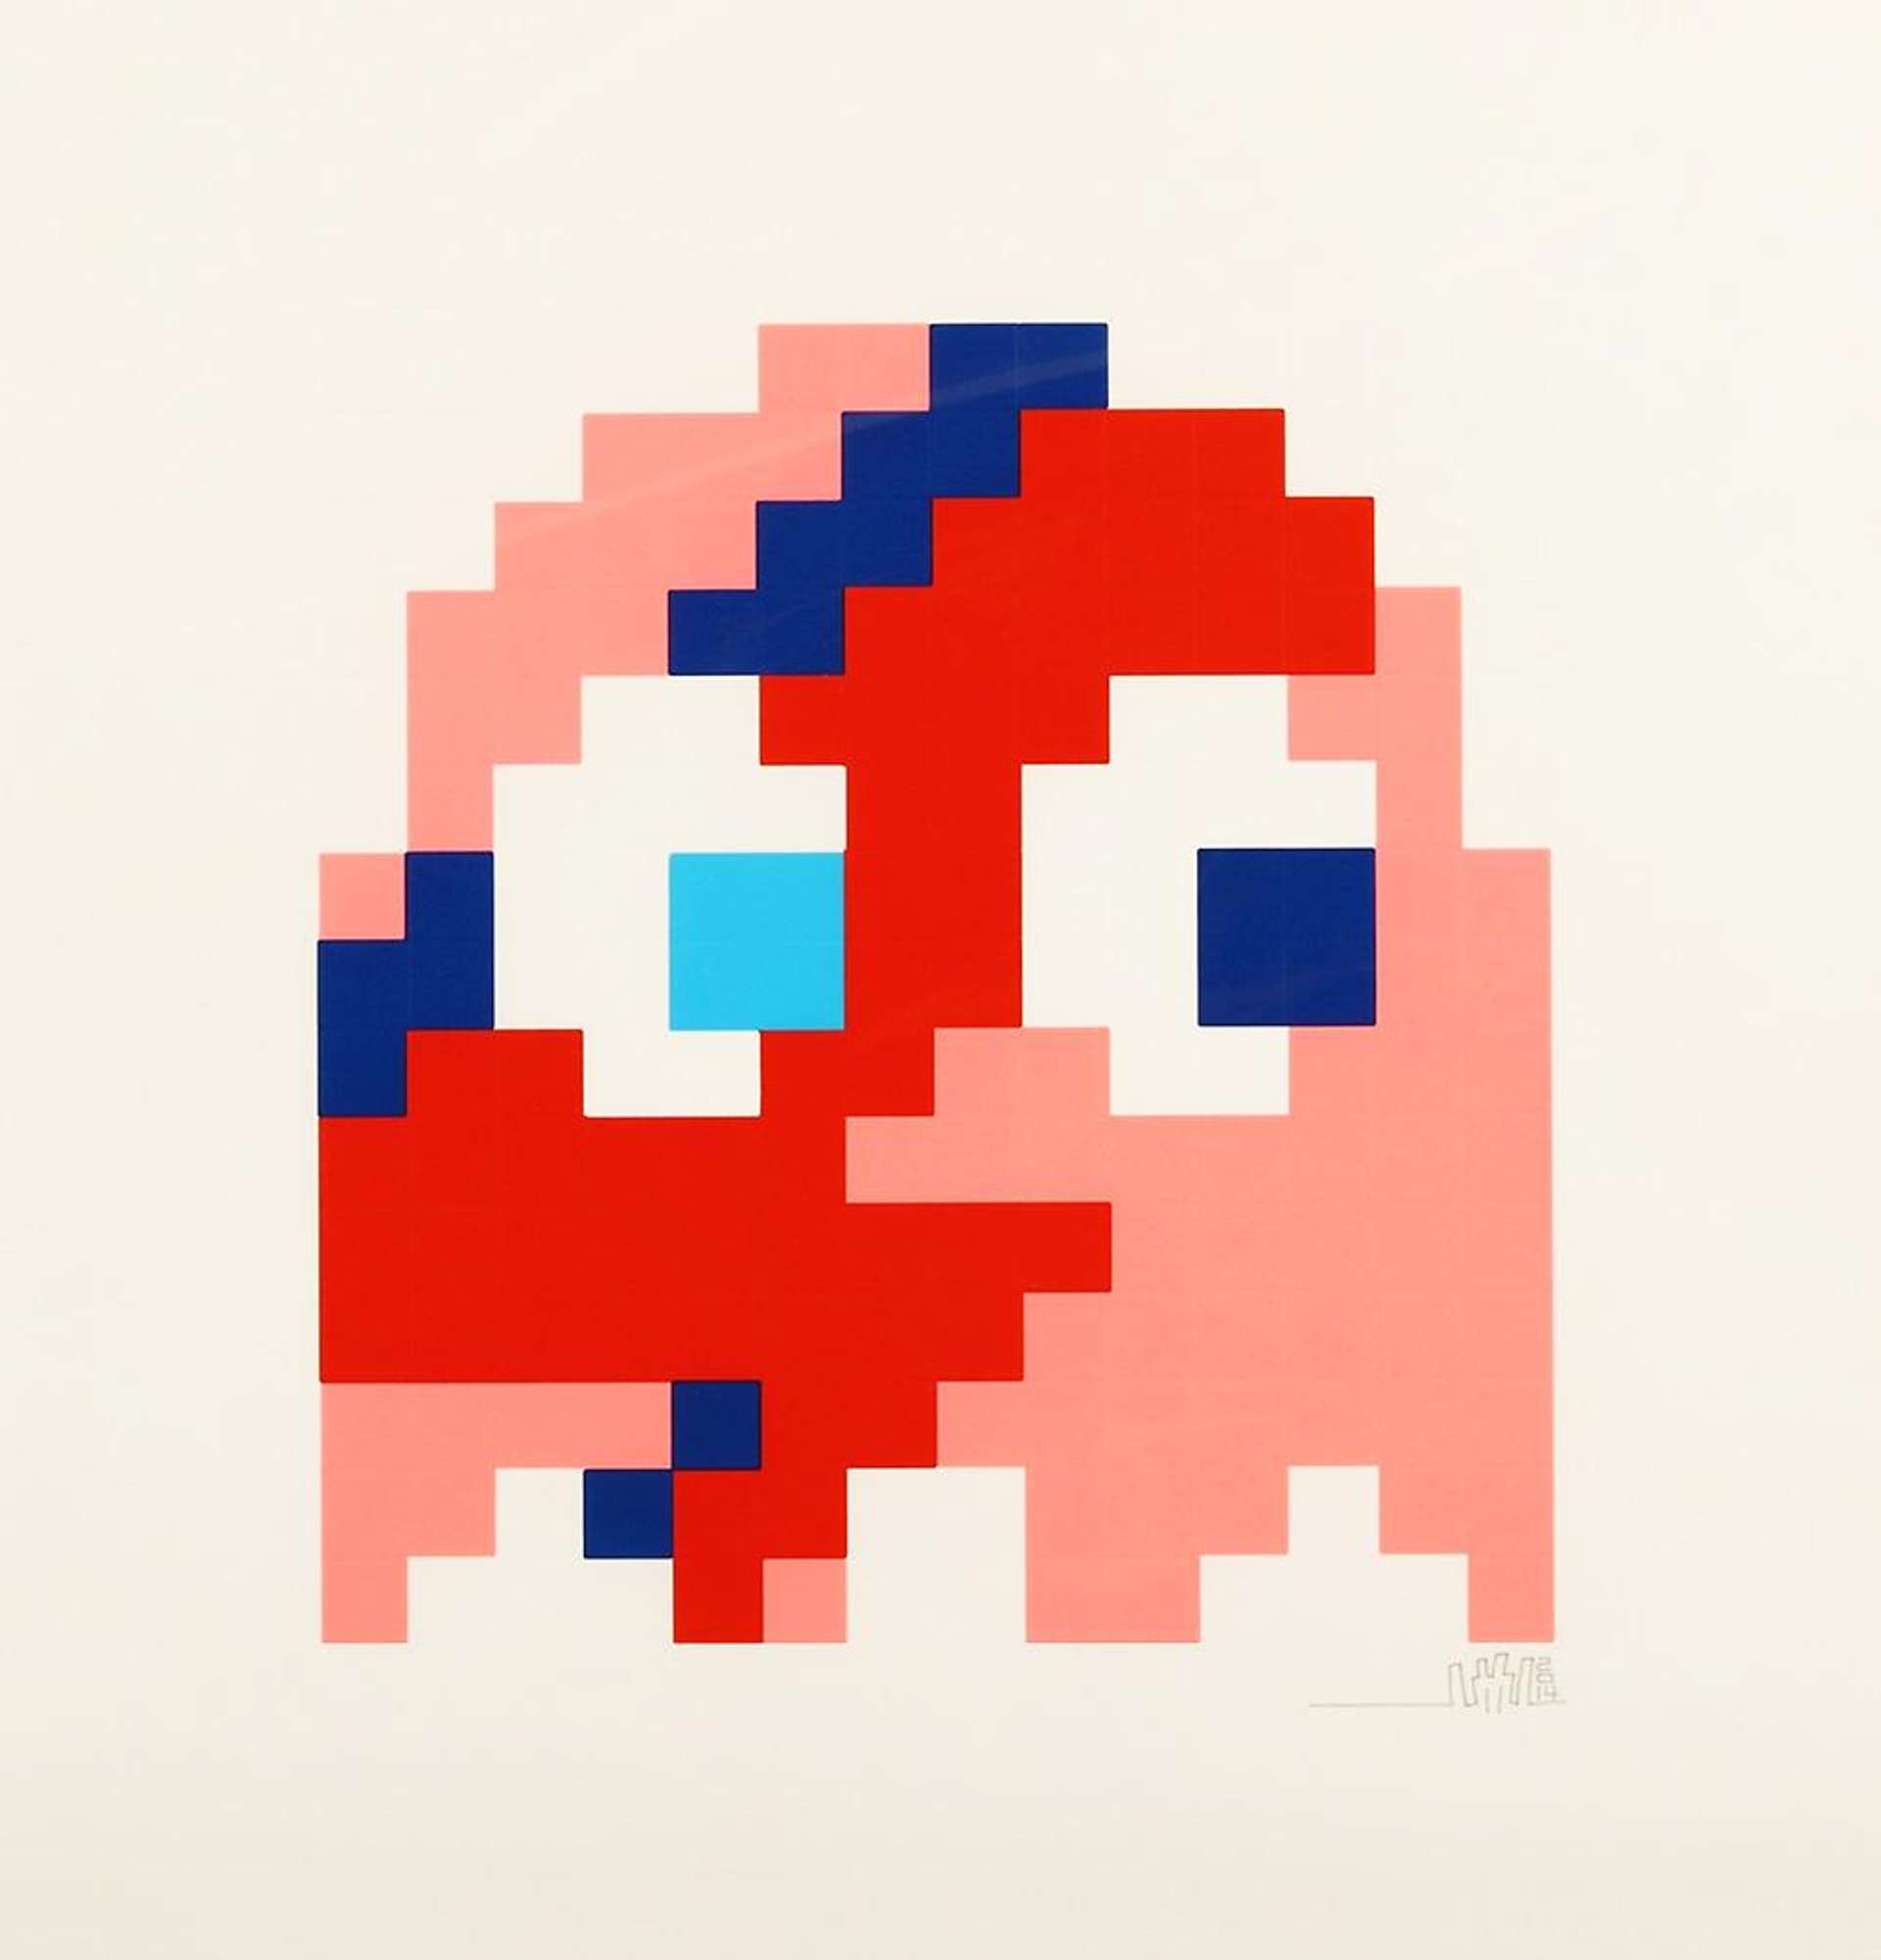 The Global Ambitions of Invader's Street Art